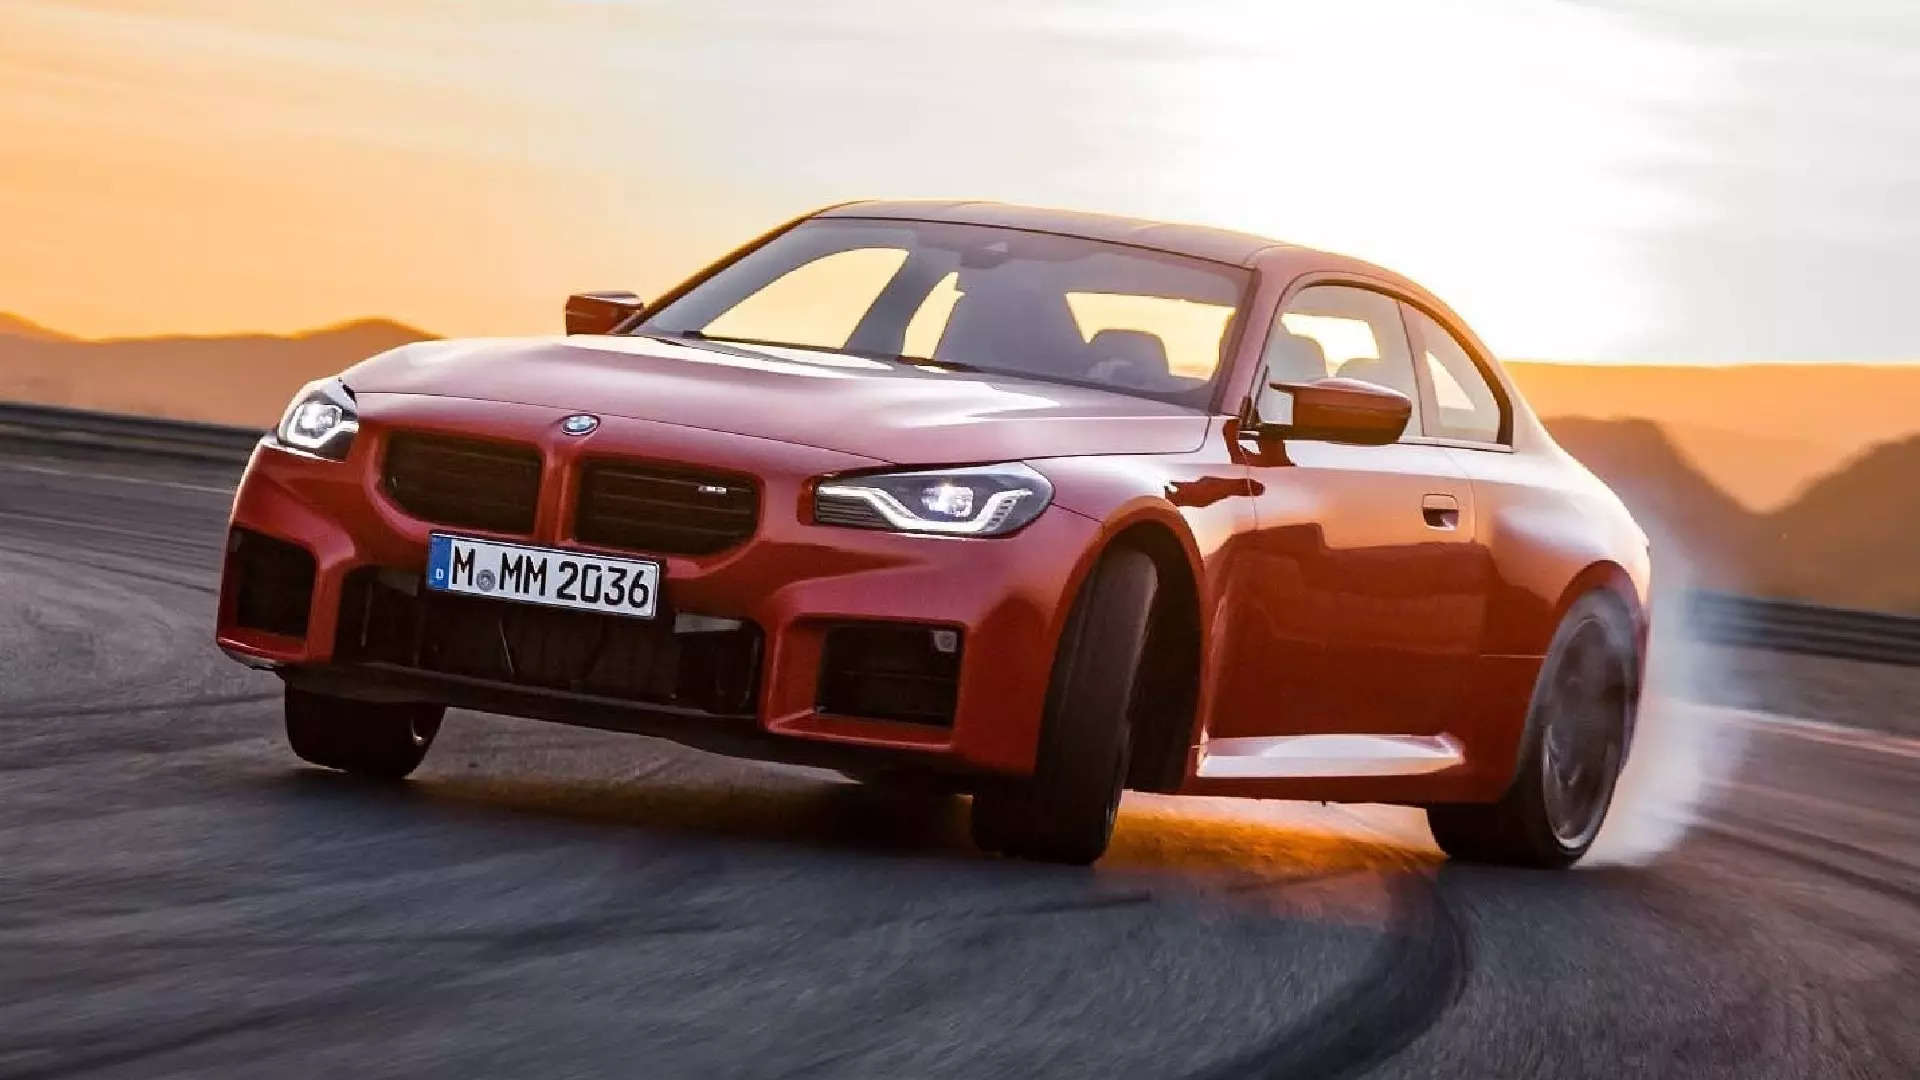 BMW M2 set to launch in India in 2023